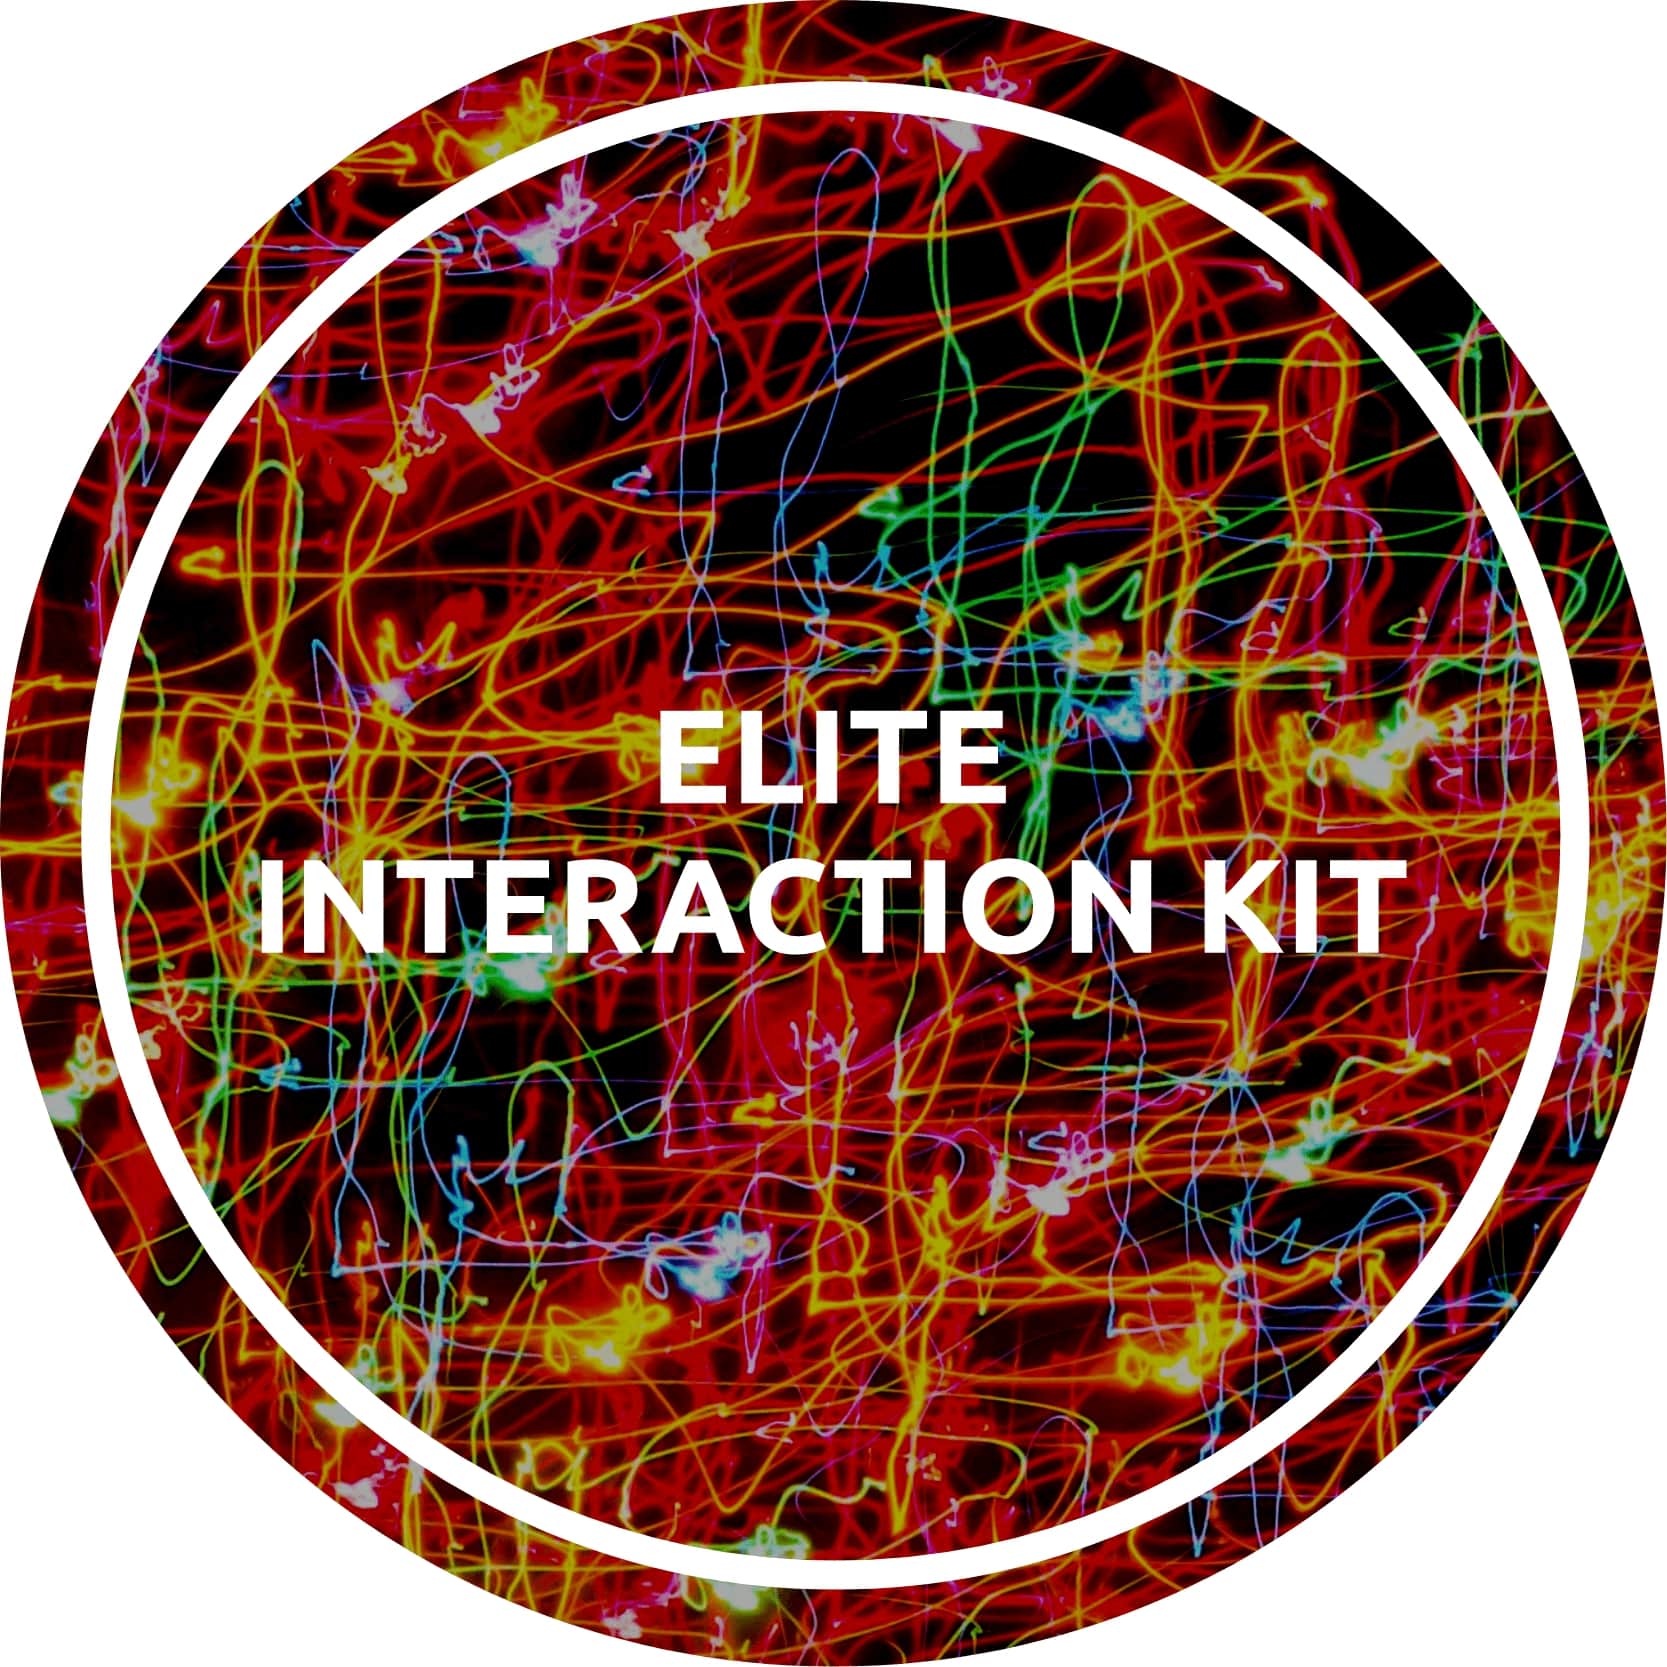 The Elite Interaction Kit includes the following packed Blebricks: BLE-B, CAP, PCB, VBR, BUZ, WPL, RPS, IB3 and a FIX.